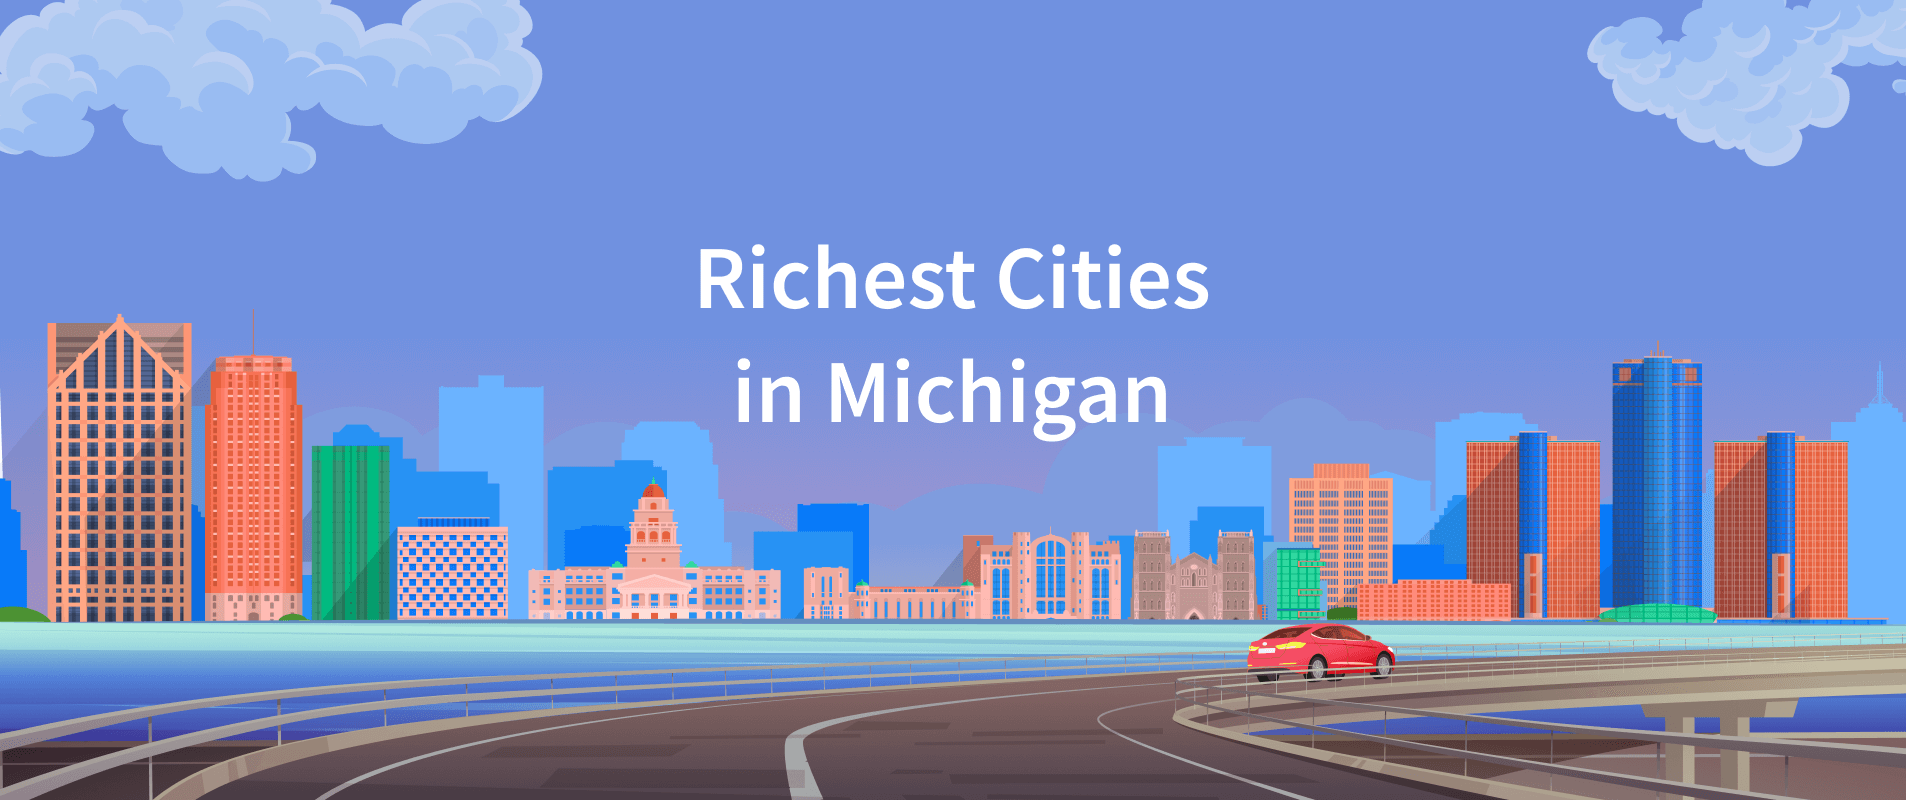 10 Wealthiest Cities in Michigan Rich Areas in MI